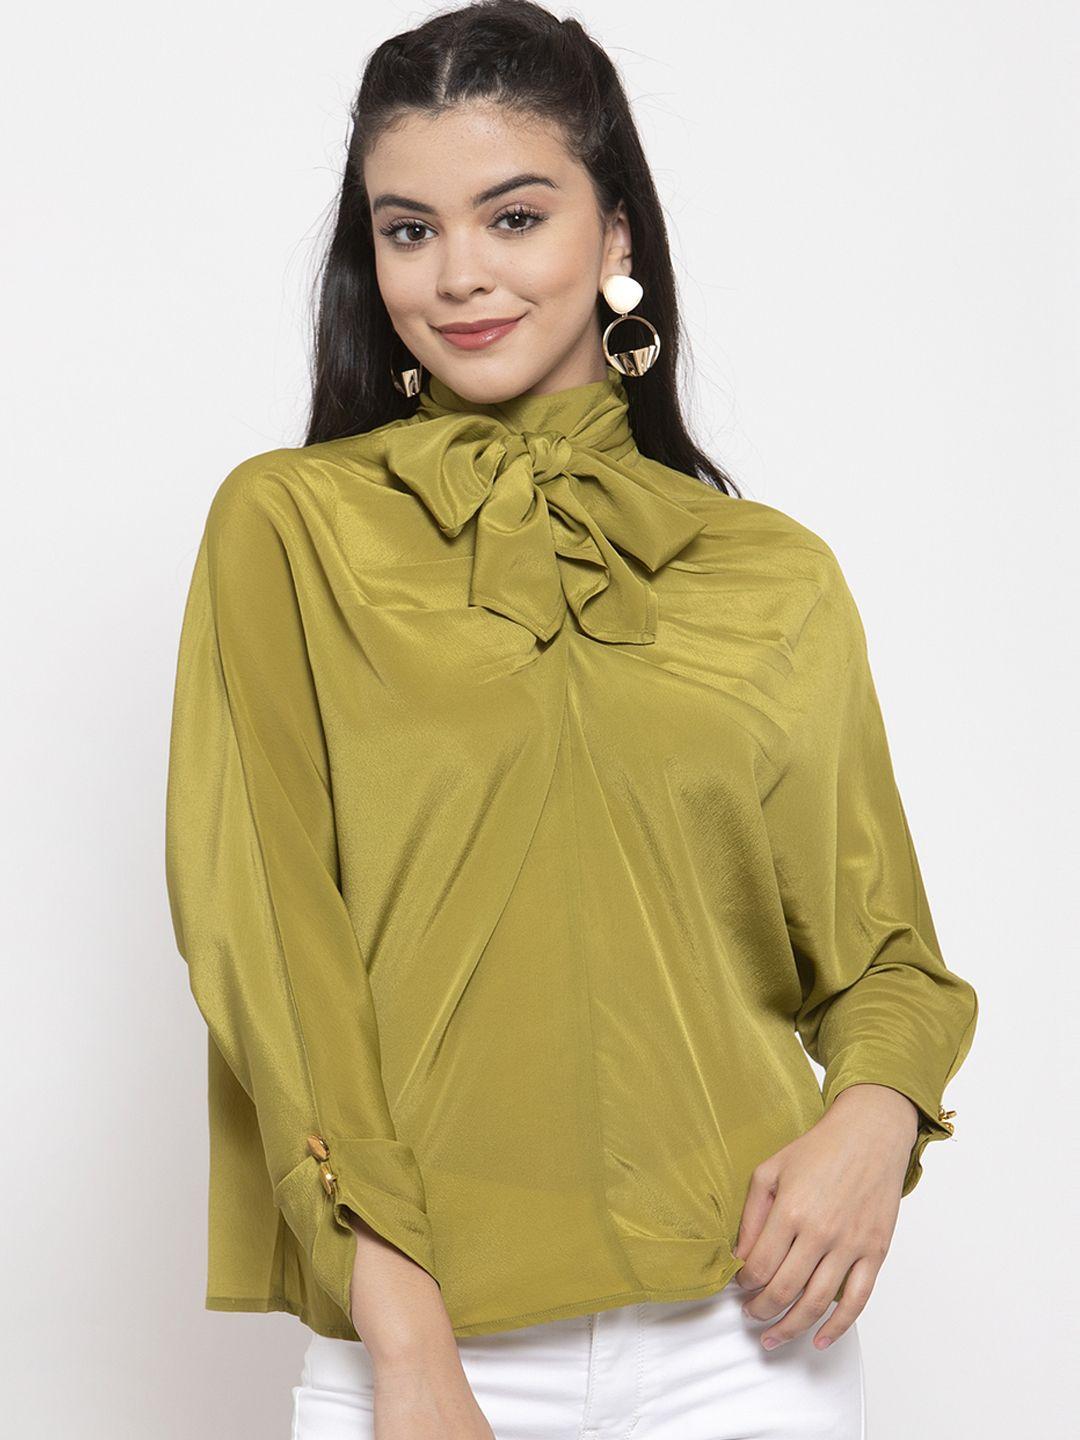 kassually women olive green solid top